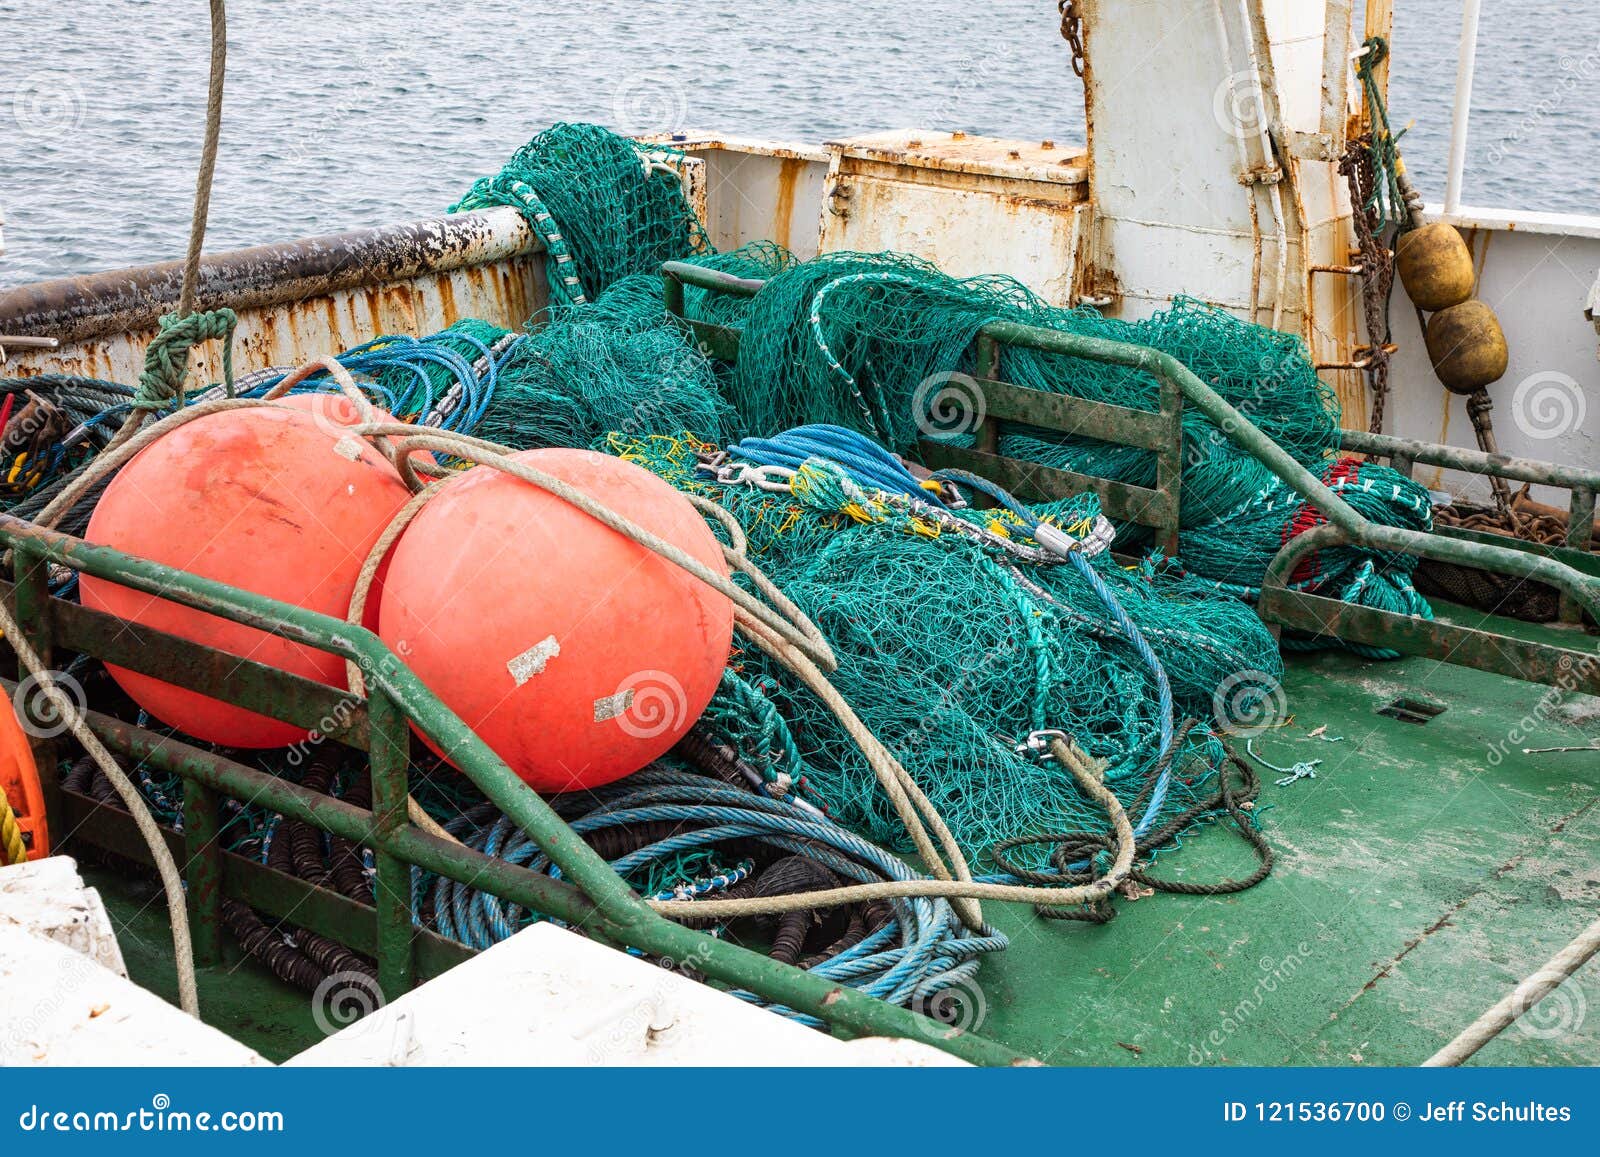 Commercial Fishing Gear stock photo. Image of water - 121536700